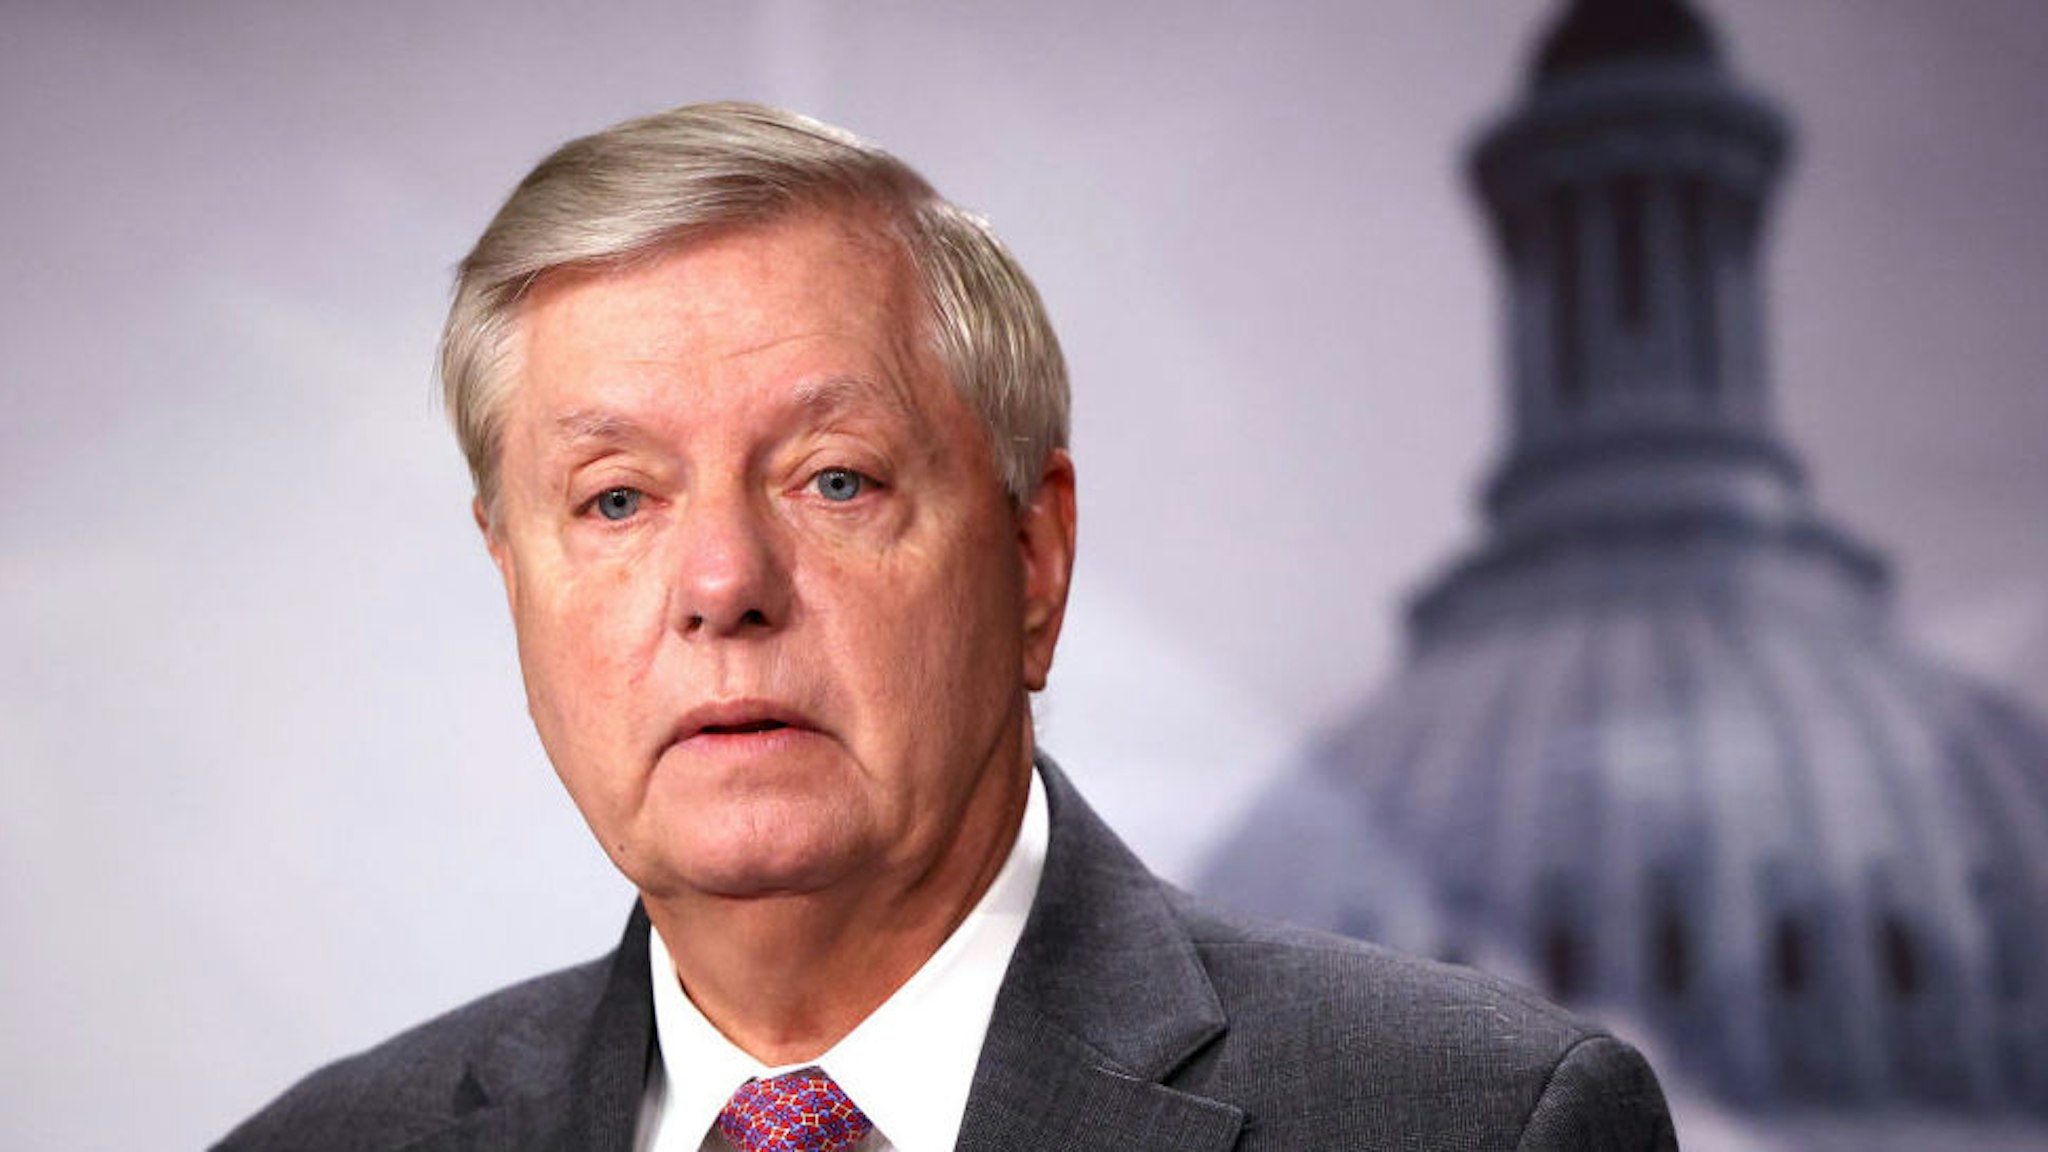 WASHINGTON, DC - JULY 30: U.S. Sen. Lindsey Graham (R-SC) speaks on southern border security and illegal immigration, during a news conference at the U.S. Capitol on July 30, 2021 in Washington, DC. Graham urged the Biden administration to name former Homeland Security Secretary Jeh Johnson as a border czar. (Photo by